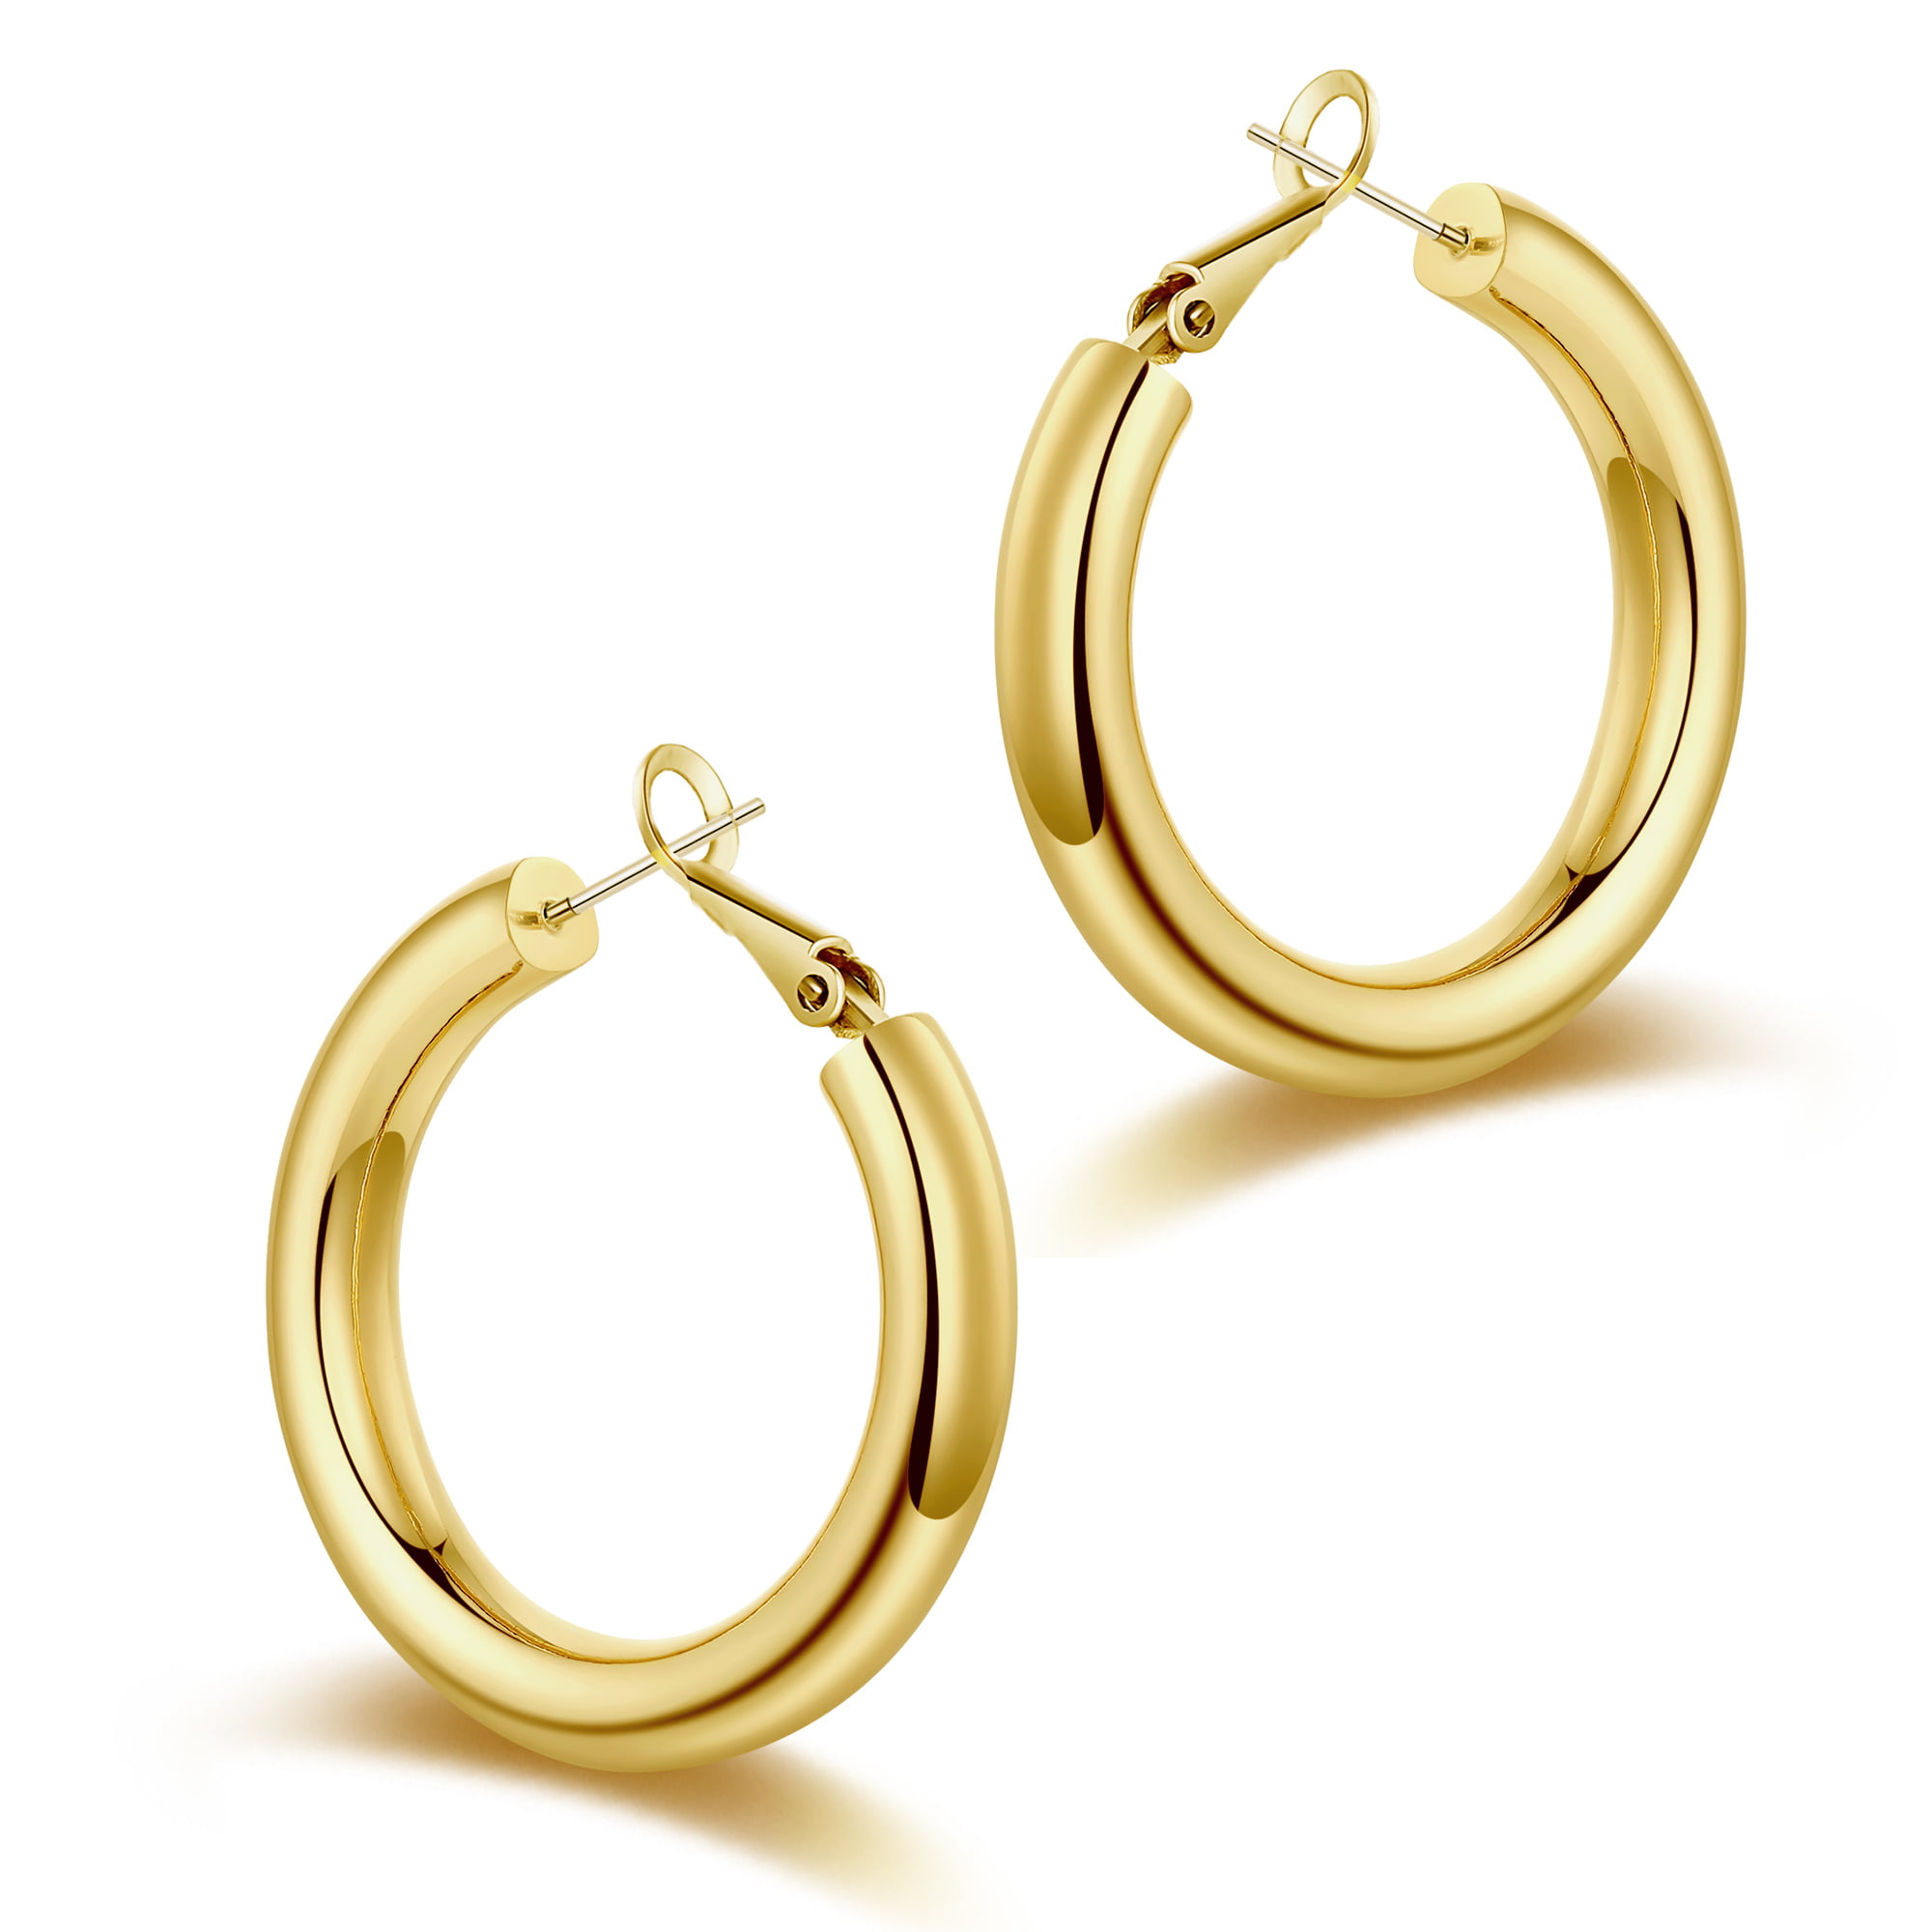 IEFRICH Chunky Gold Hoop Earrings for Women S925 Sterling Silver Post 14K  Gold Plated 25mm Small Thick Tube Lightweight Hoops Earrings